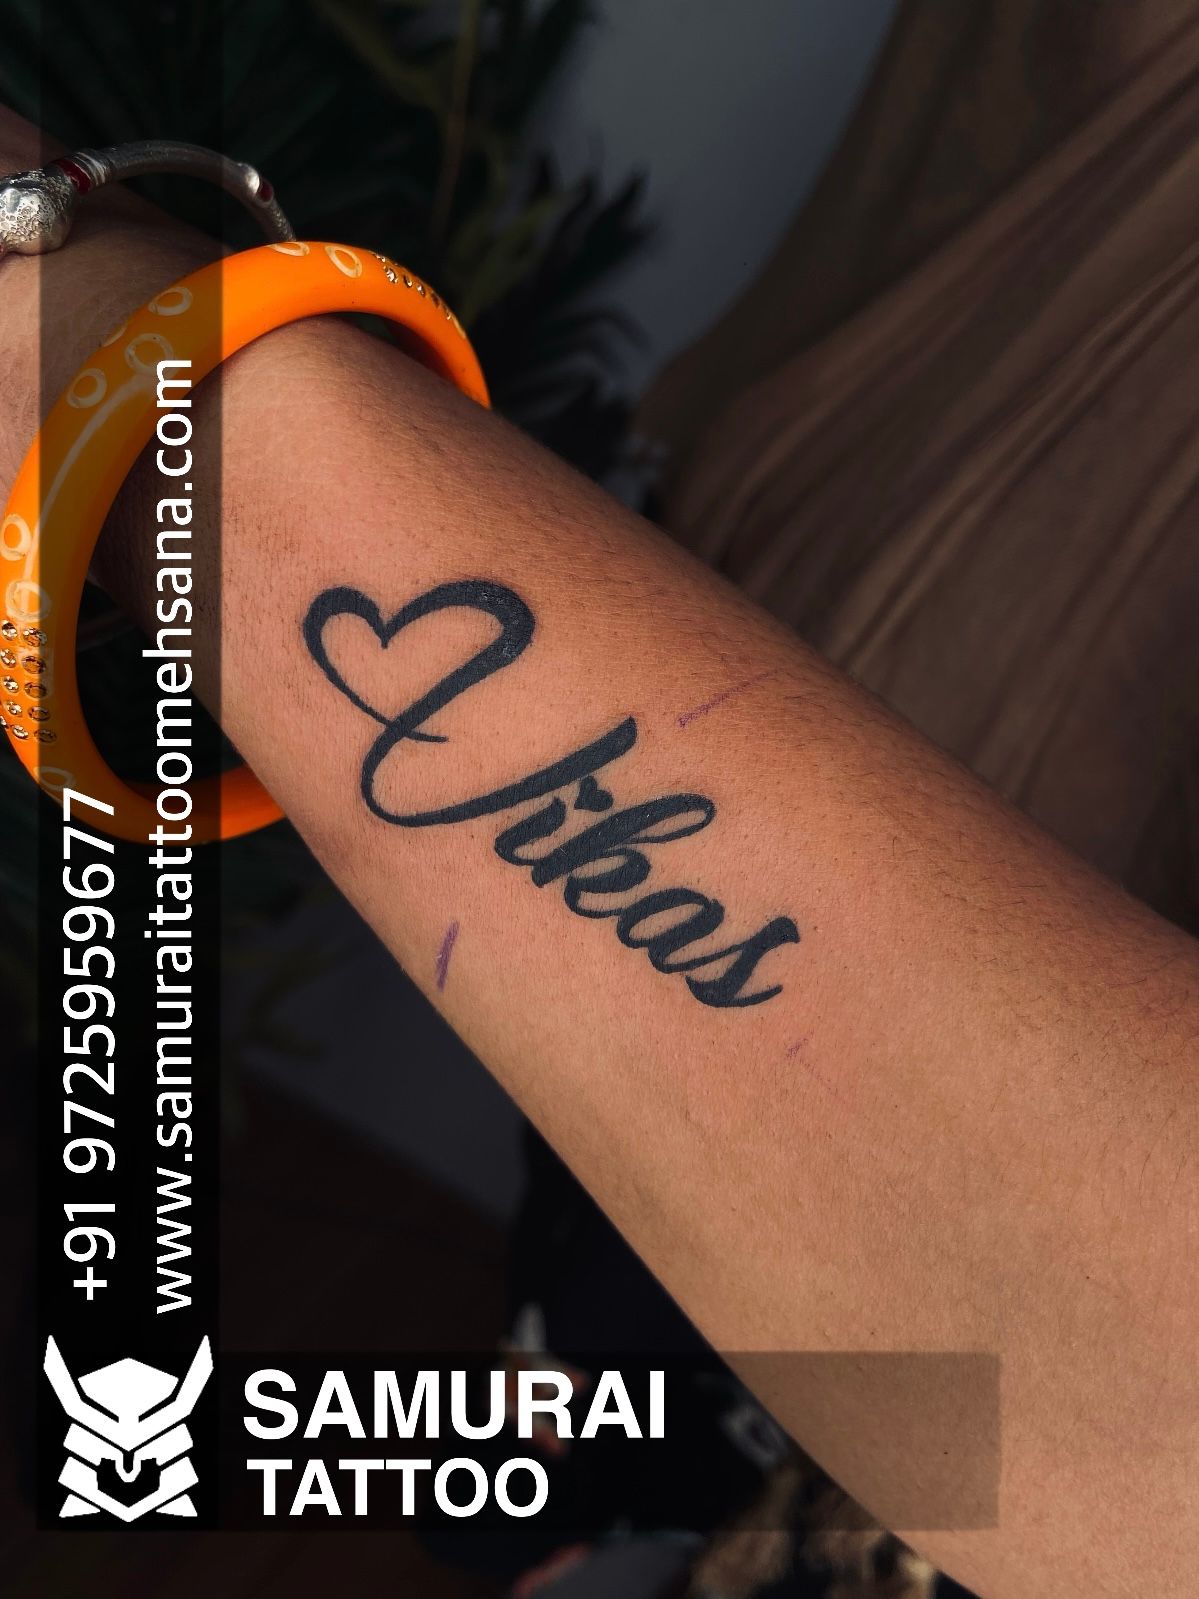 Rakesh name font tattoo design with crown and heart rakesh name font  XPOZE tattoos  Tattoo designs Life tattoos Tattoo fonts